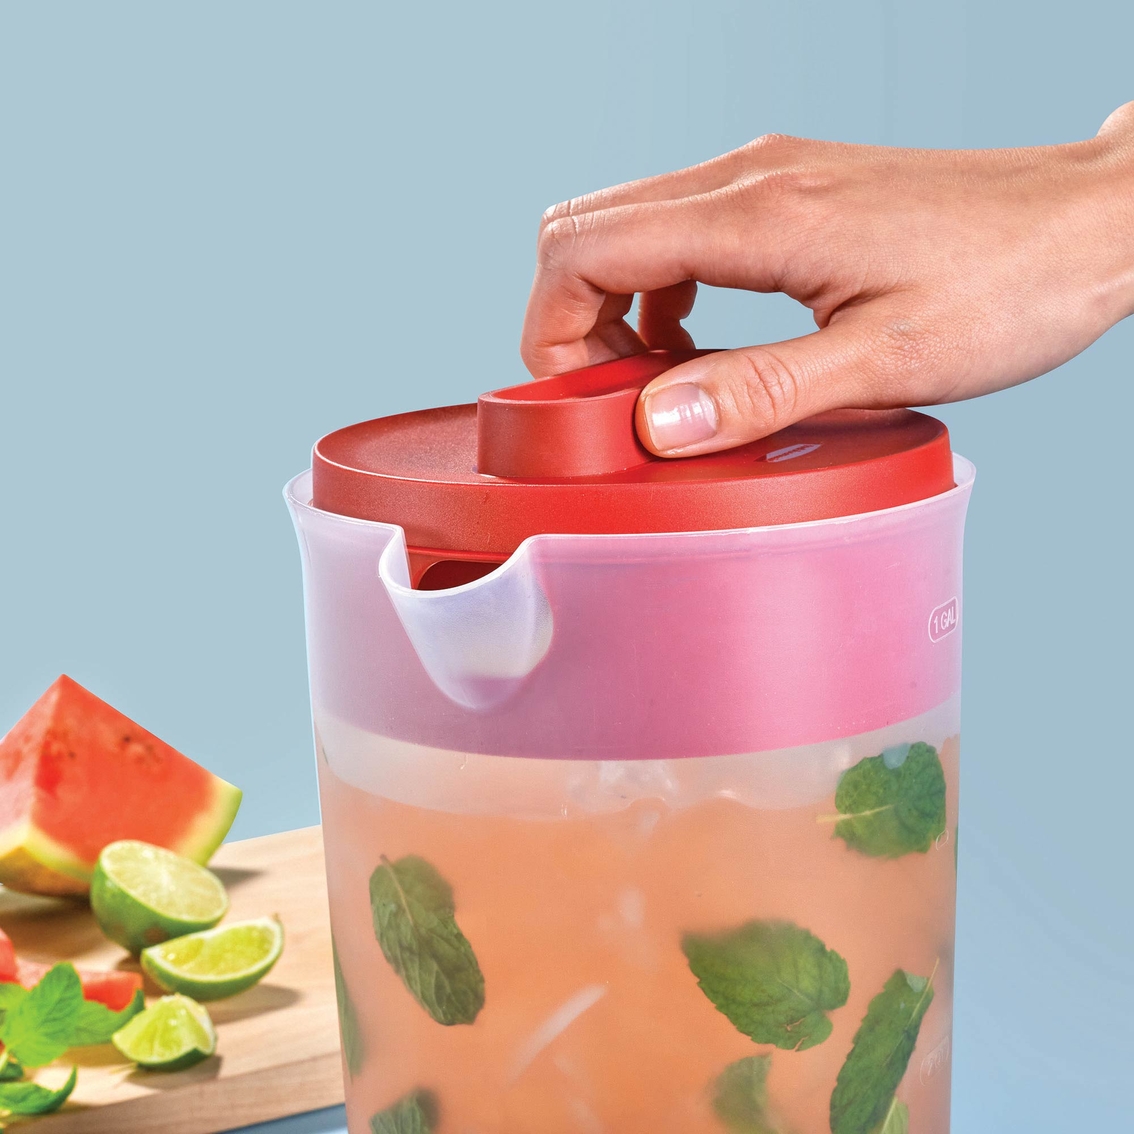 Rubbermaid Simply Pour 1 gal. Pitcher - Image 2 of 2